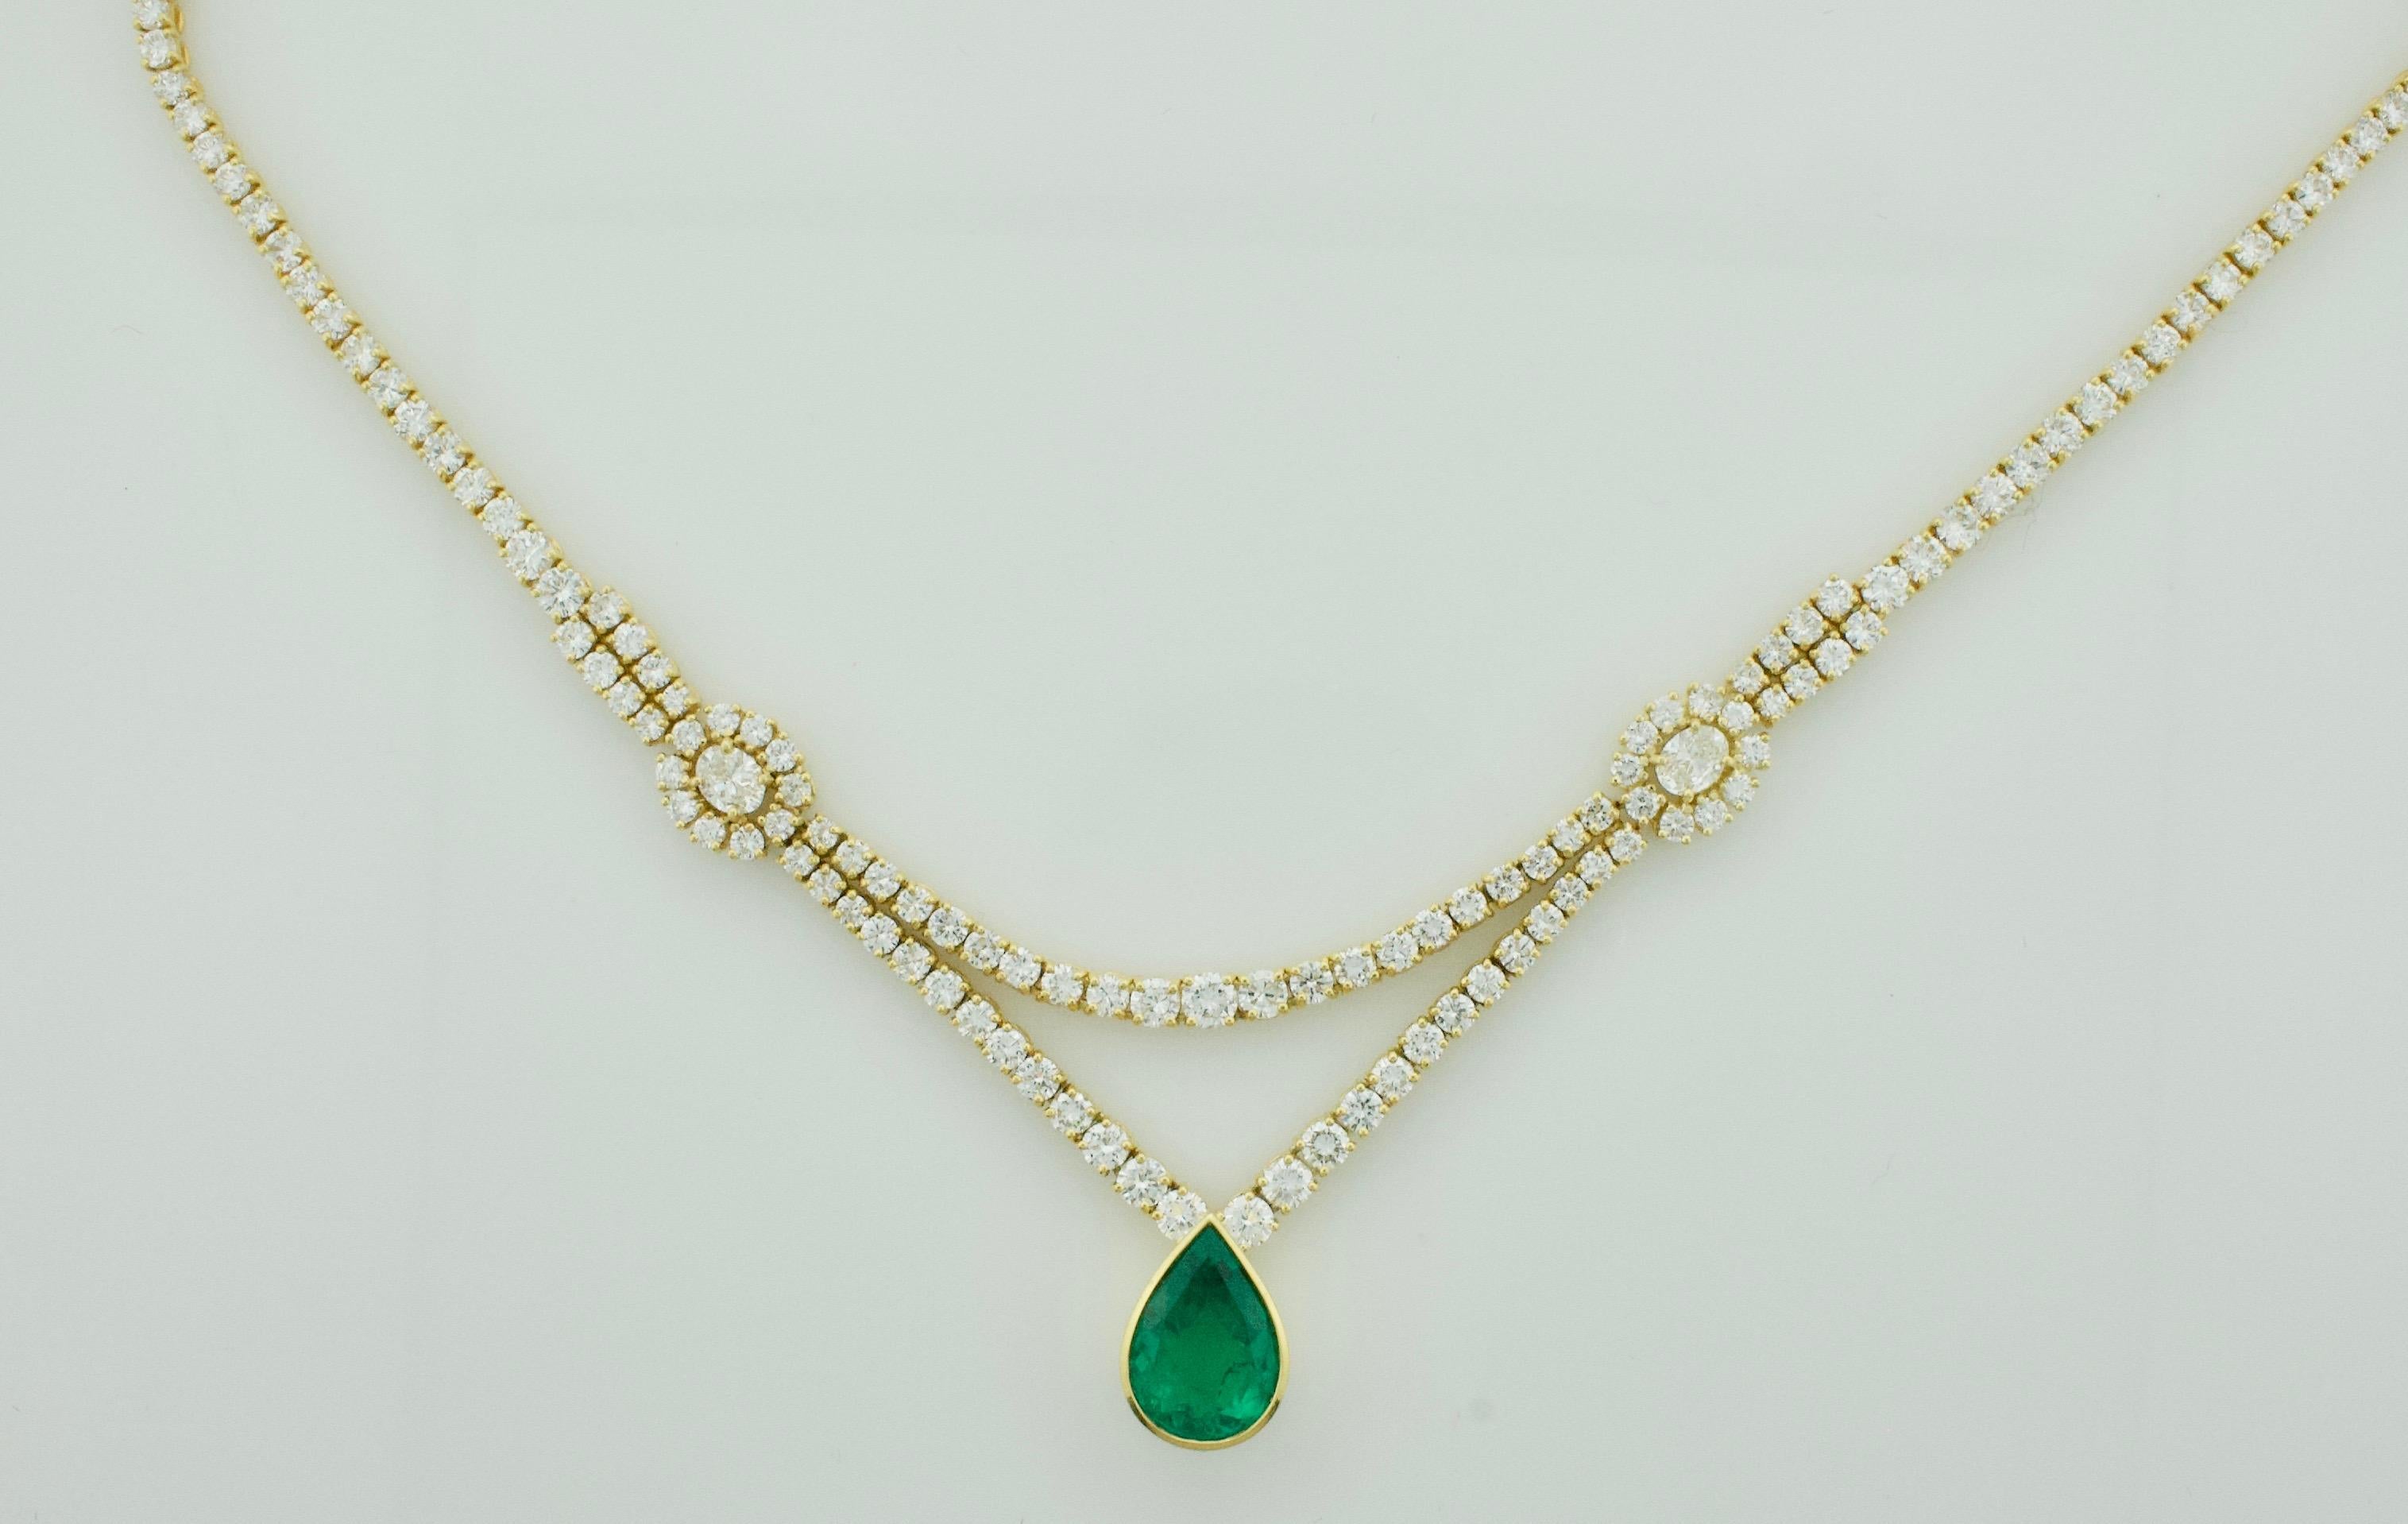 Indulge in timeless elegance with our exquisite Important Emerald and Diamond Necklace crafted in luxurious 18k Yellow Gold. This stunning piece features a majestic Pear Shape Emerald, boasting a weight of approximately 6.00 carats. Renowned for its